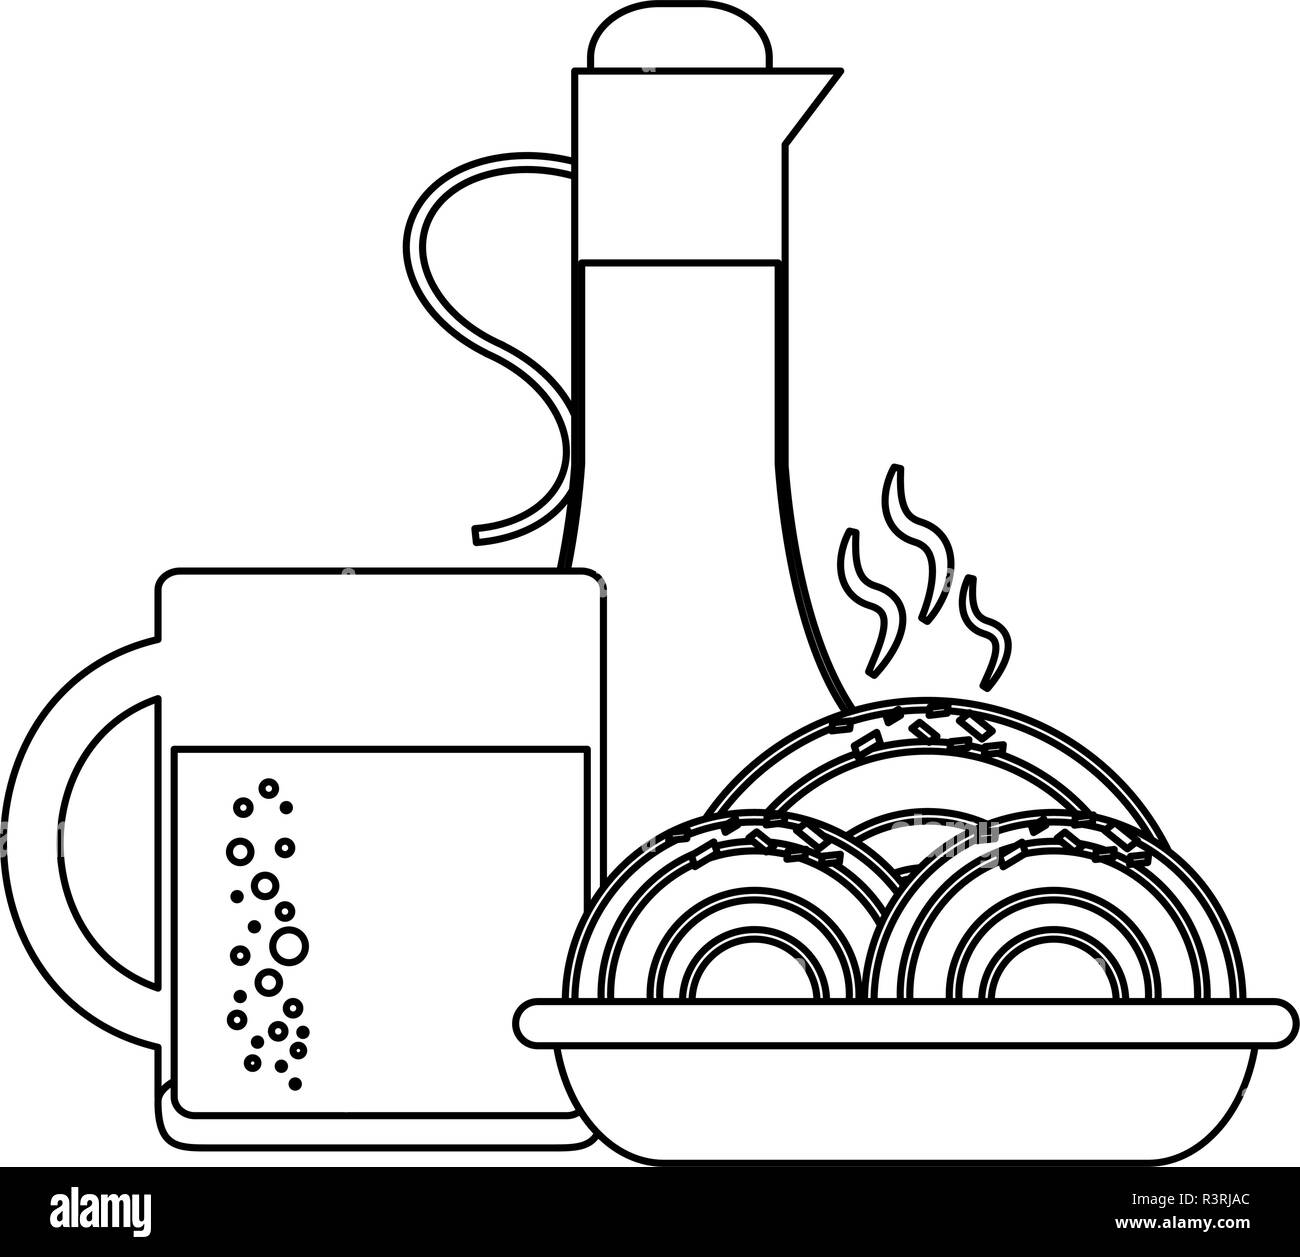 Healthy and delicious food in black and white Stock Vector